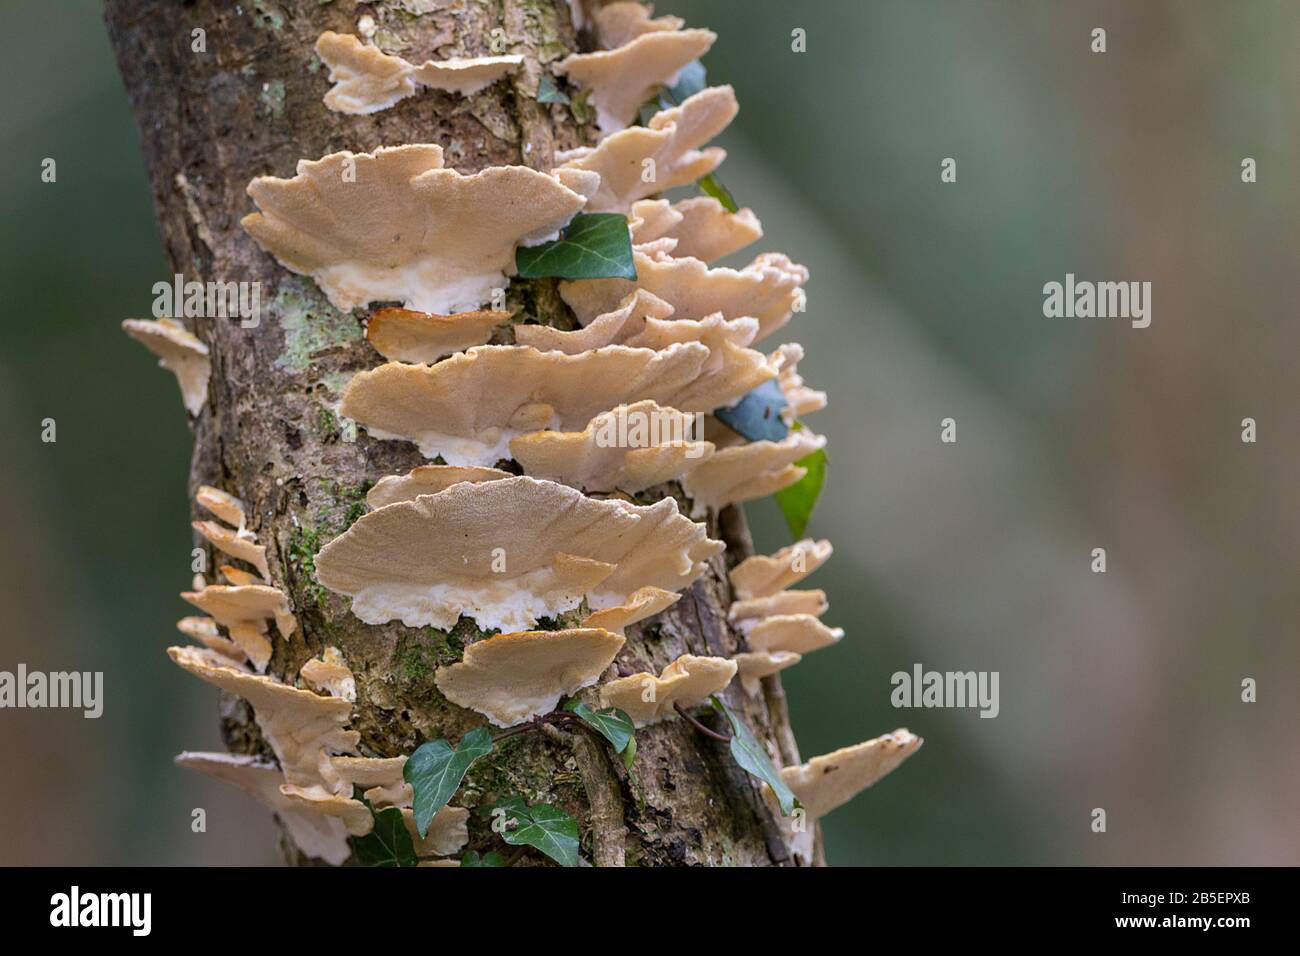 Thin pale bracket fungi on slender tree a metre or more of multiple pink flesh coloured colored wavy edged discs all around trunk with white base Stock Photo